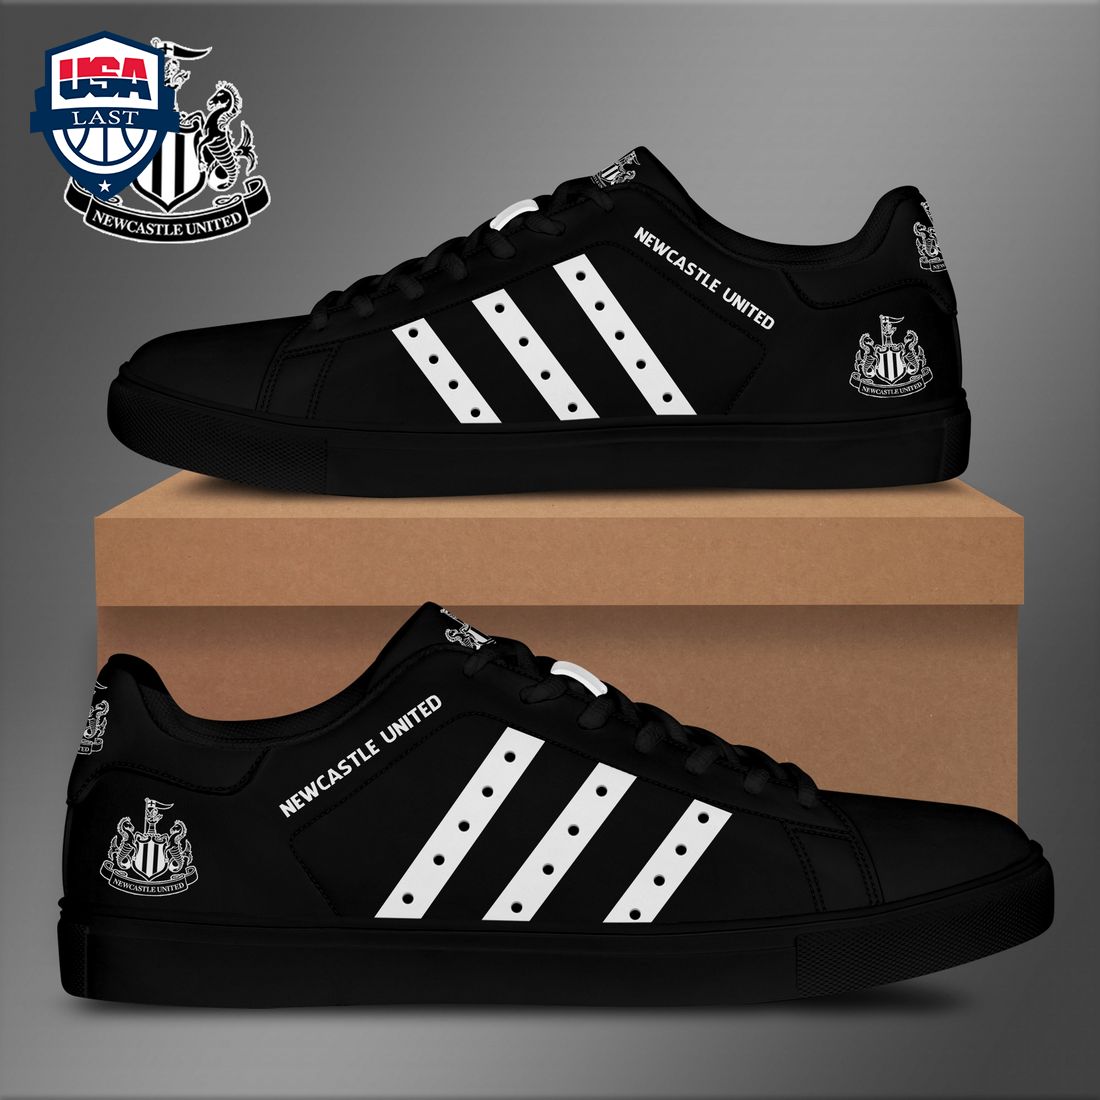 newcastle-united-fc-white-stripes-style-1-stan-smith-low-top-shoes-1-SNdM9.jpg